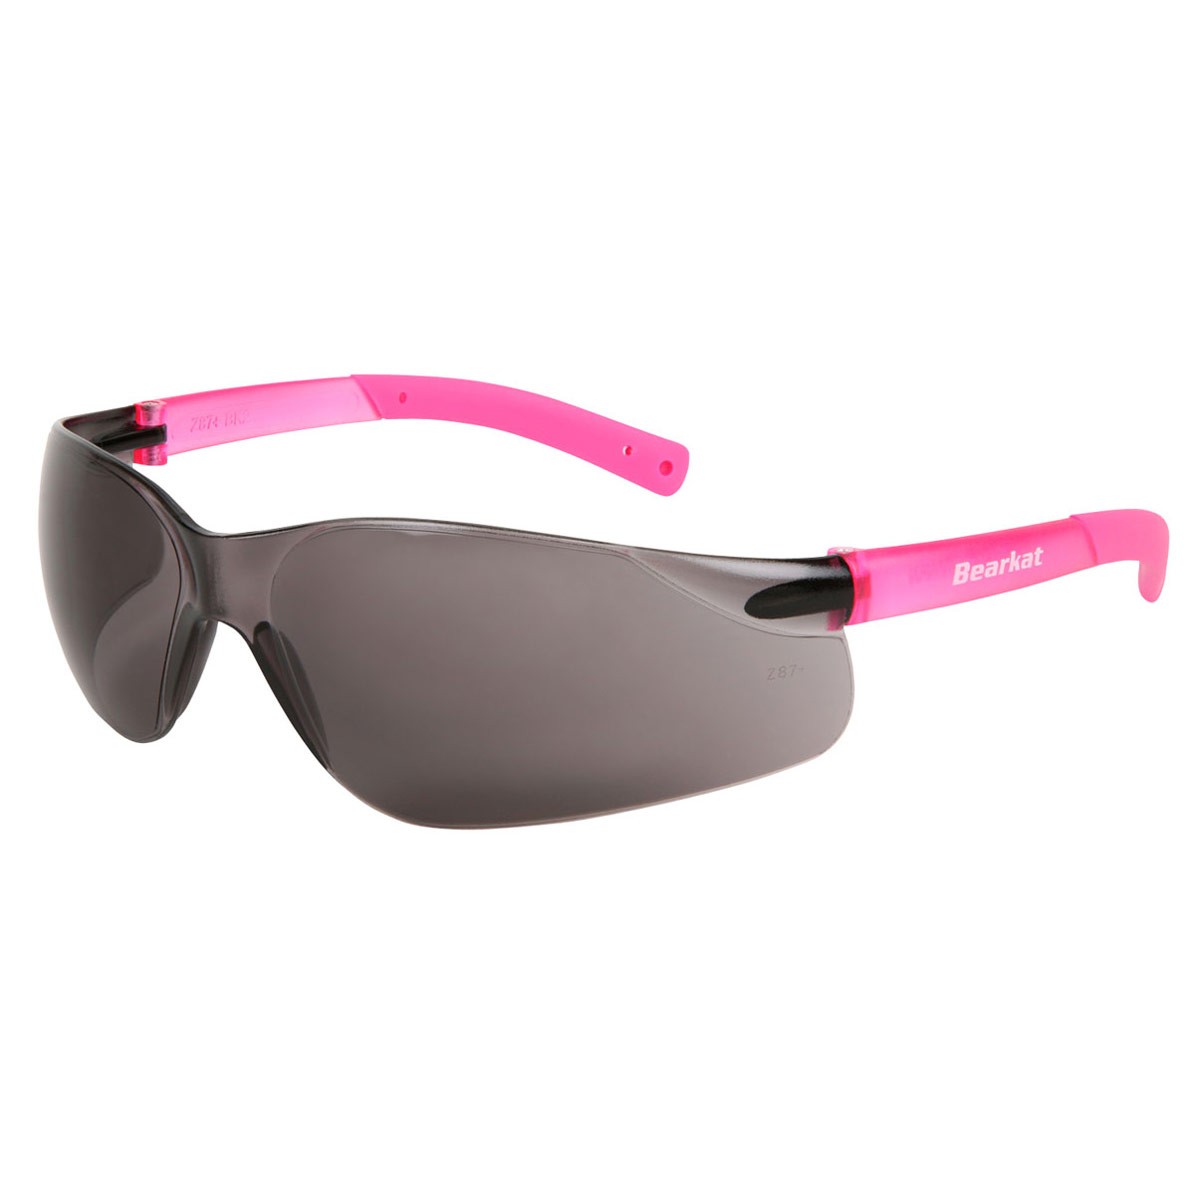 Small BearKat Glasses with Pink Temple & Gray Lenses